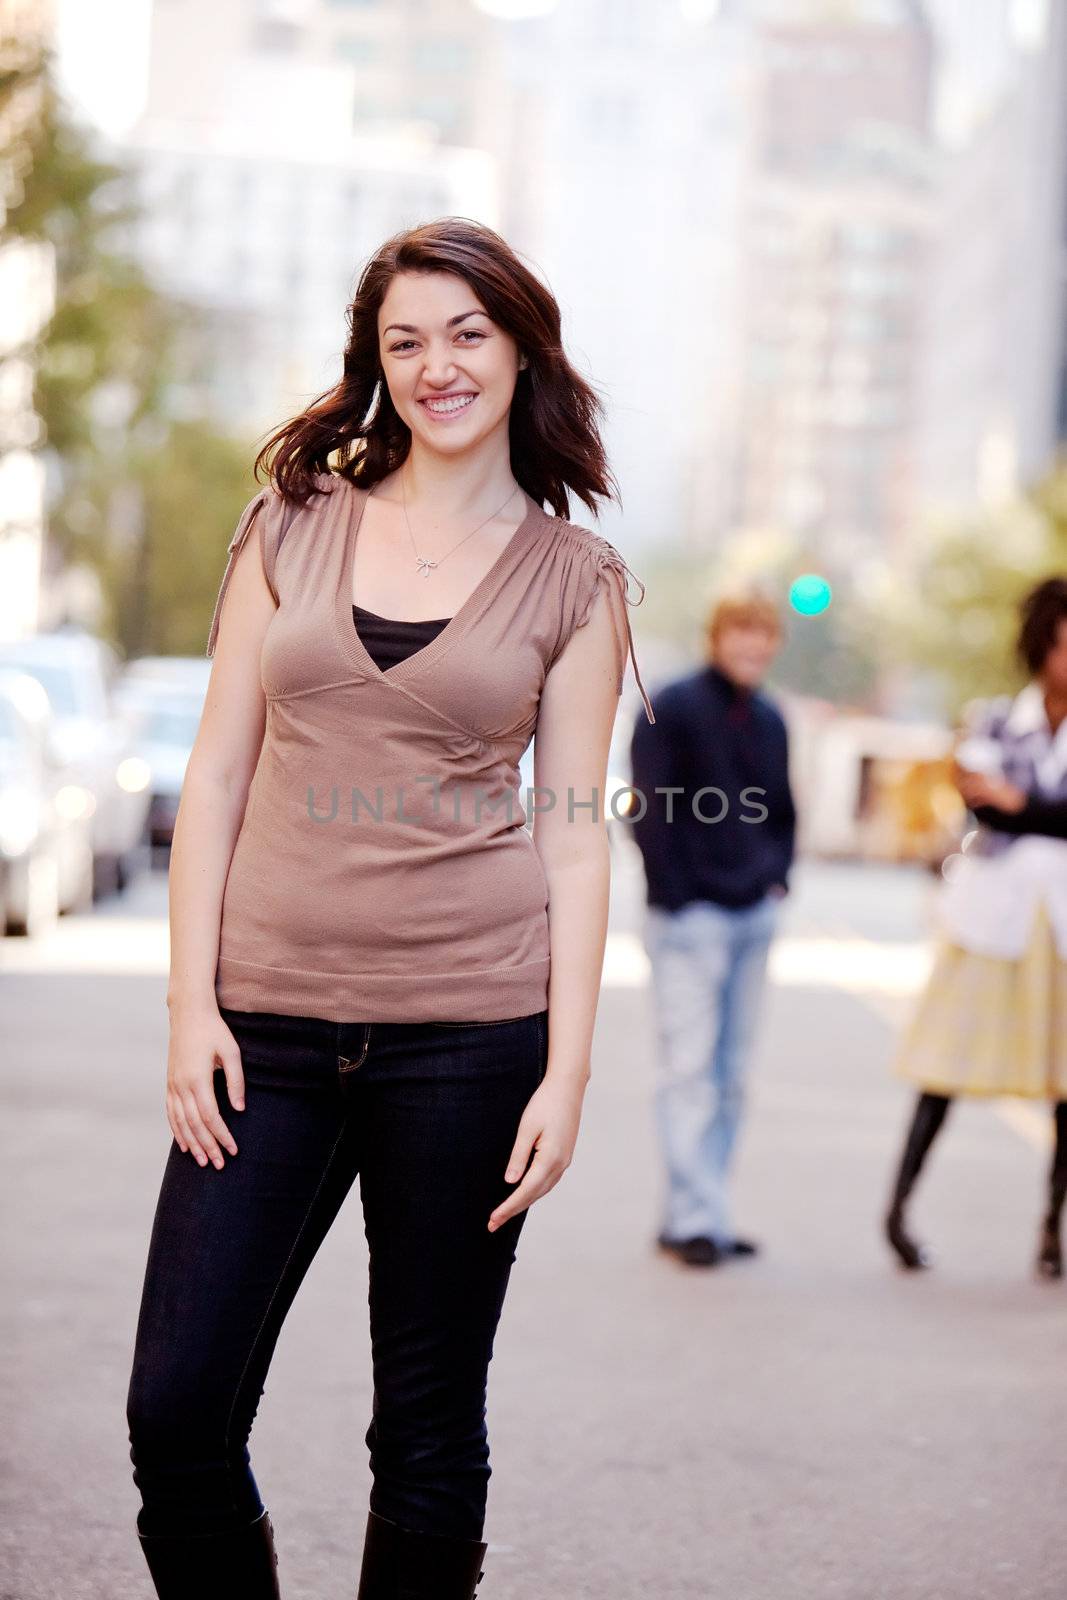 A woman in a city setting with friends in the background